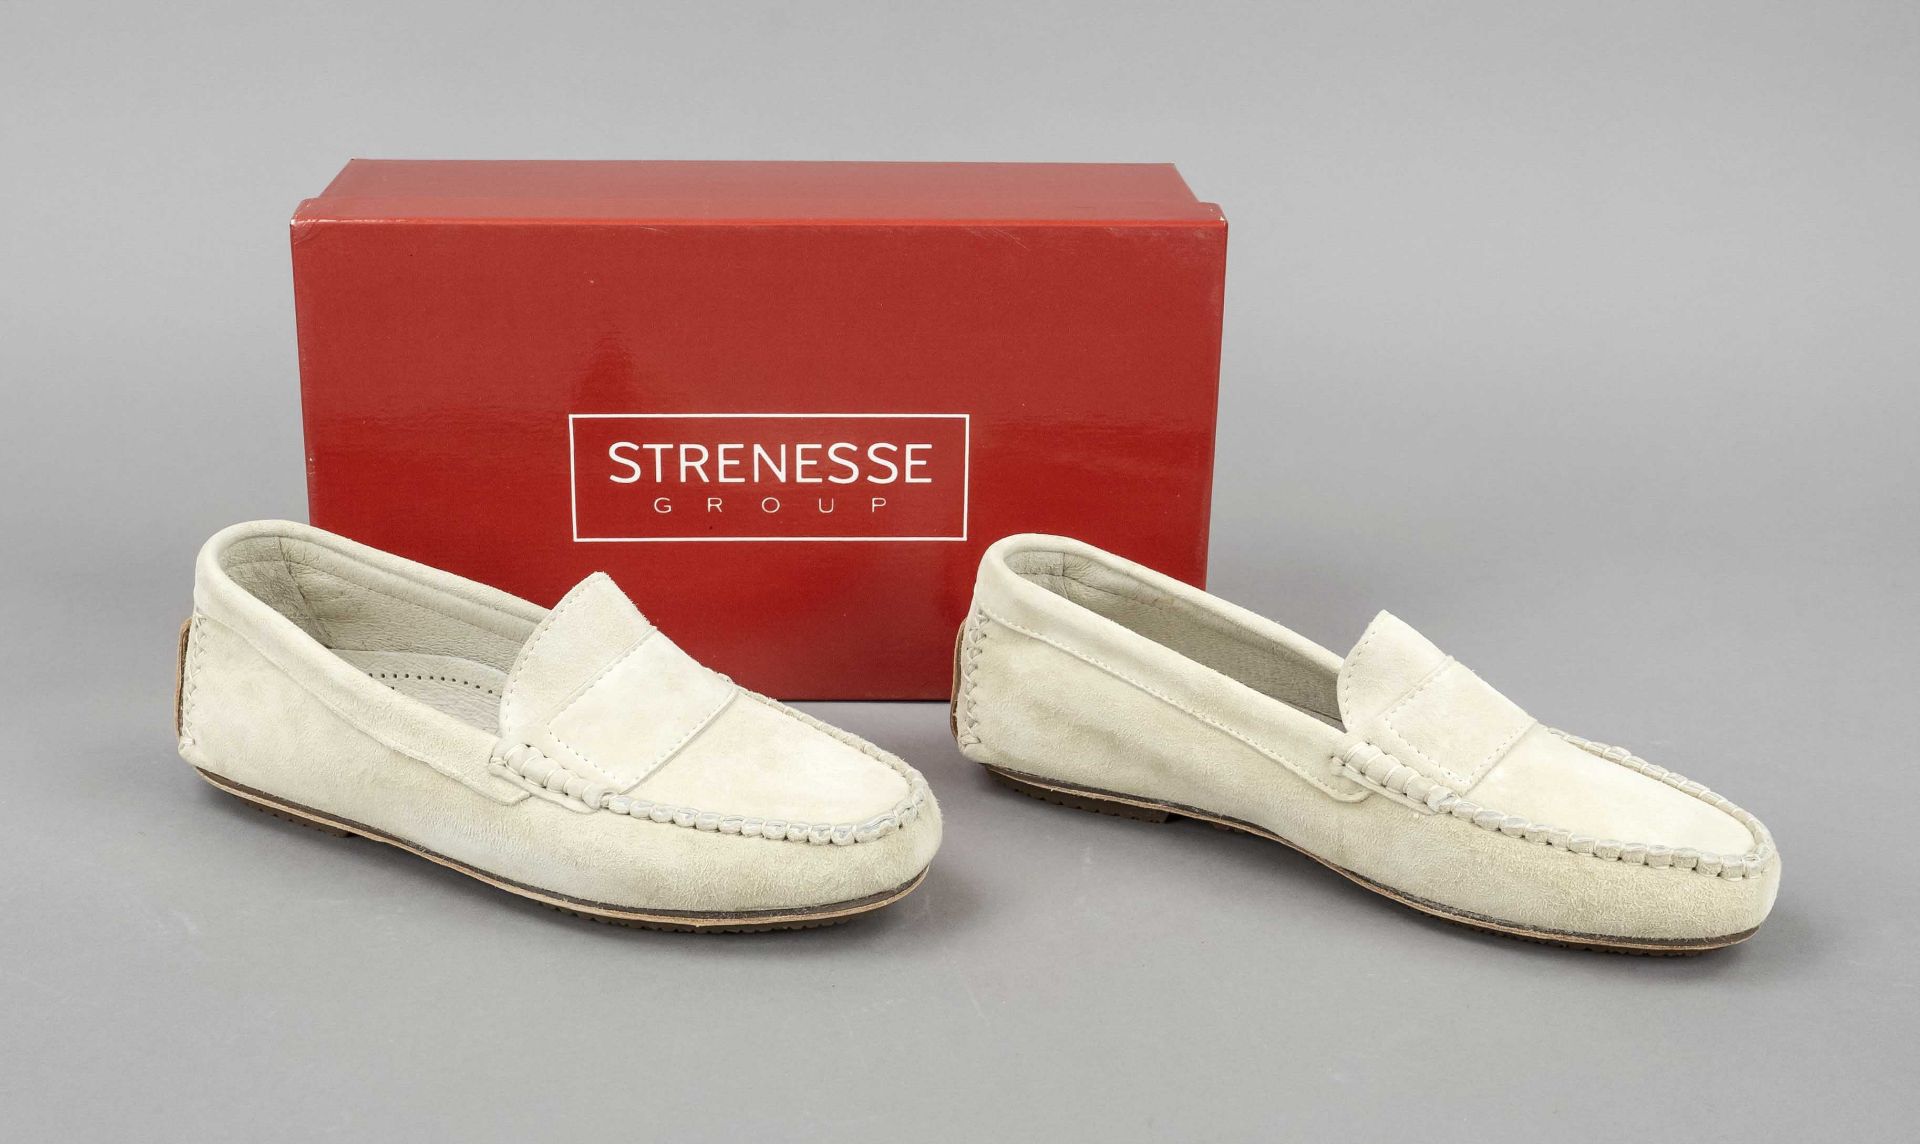 Strenesse, soft ladies moccasins, sand-colored suede, leather insole, flat partly rubberized